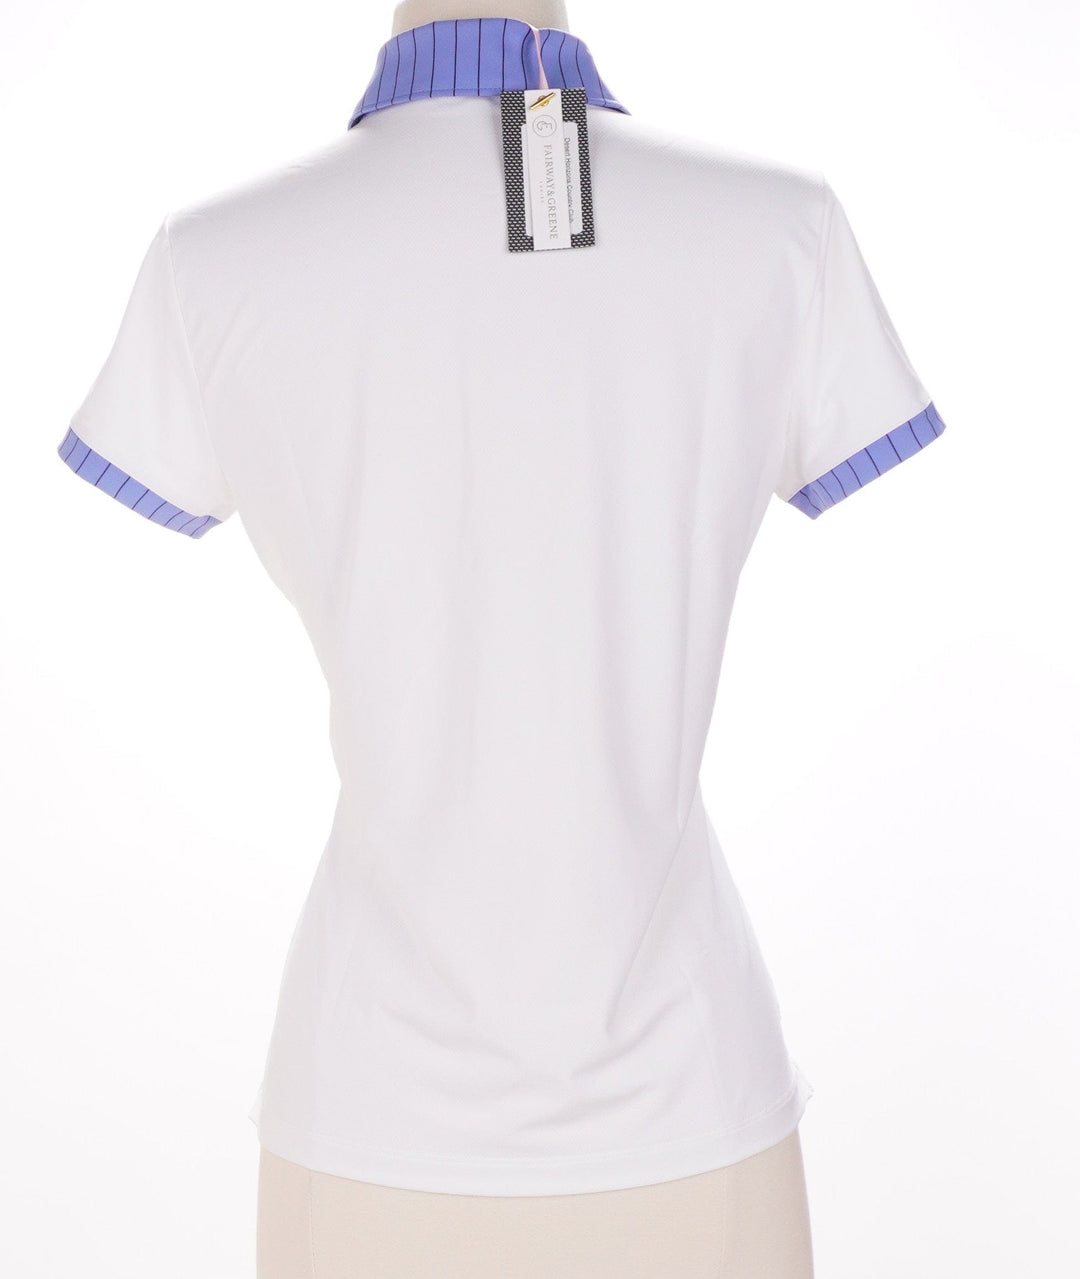 Fairway &amp; Greene Small / White / New With Tags Fairway & Greene Short Sleeve Golf Top - White-Blue - Small